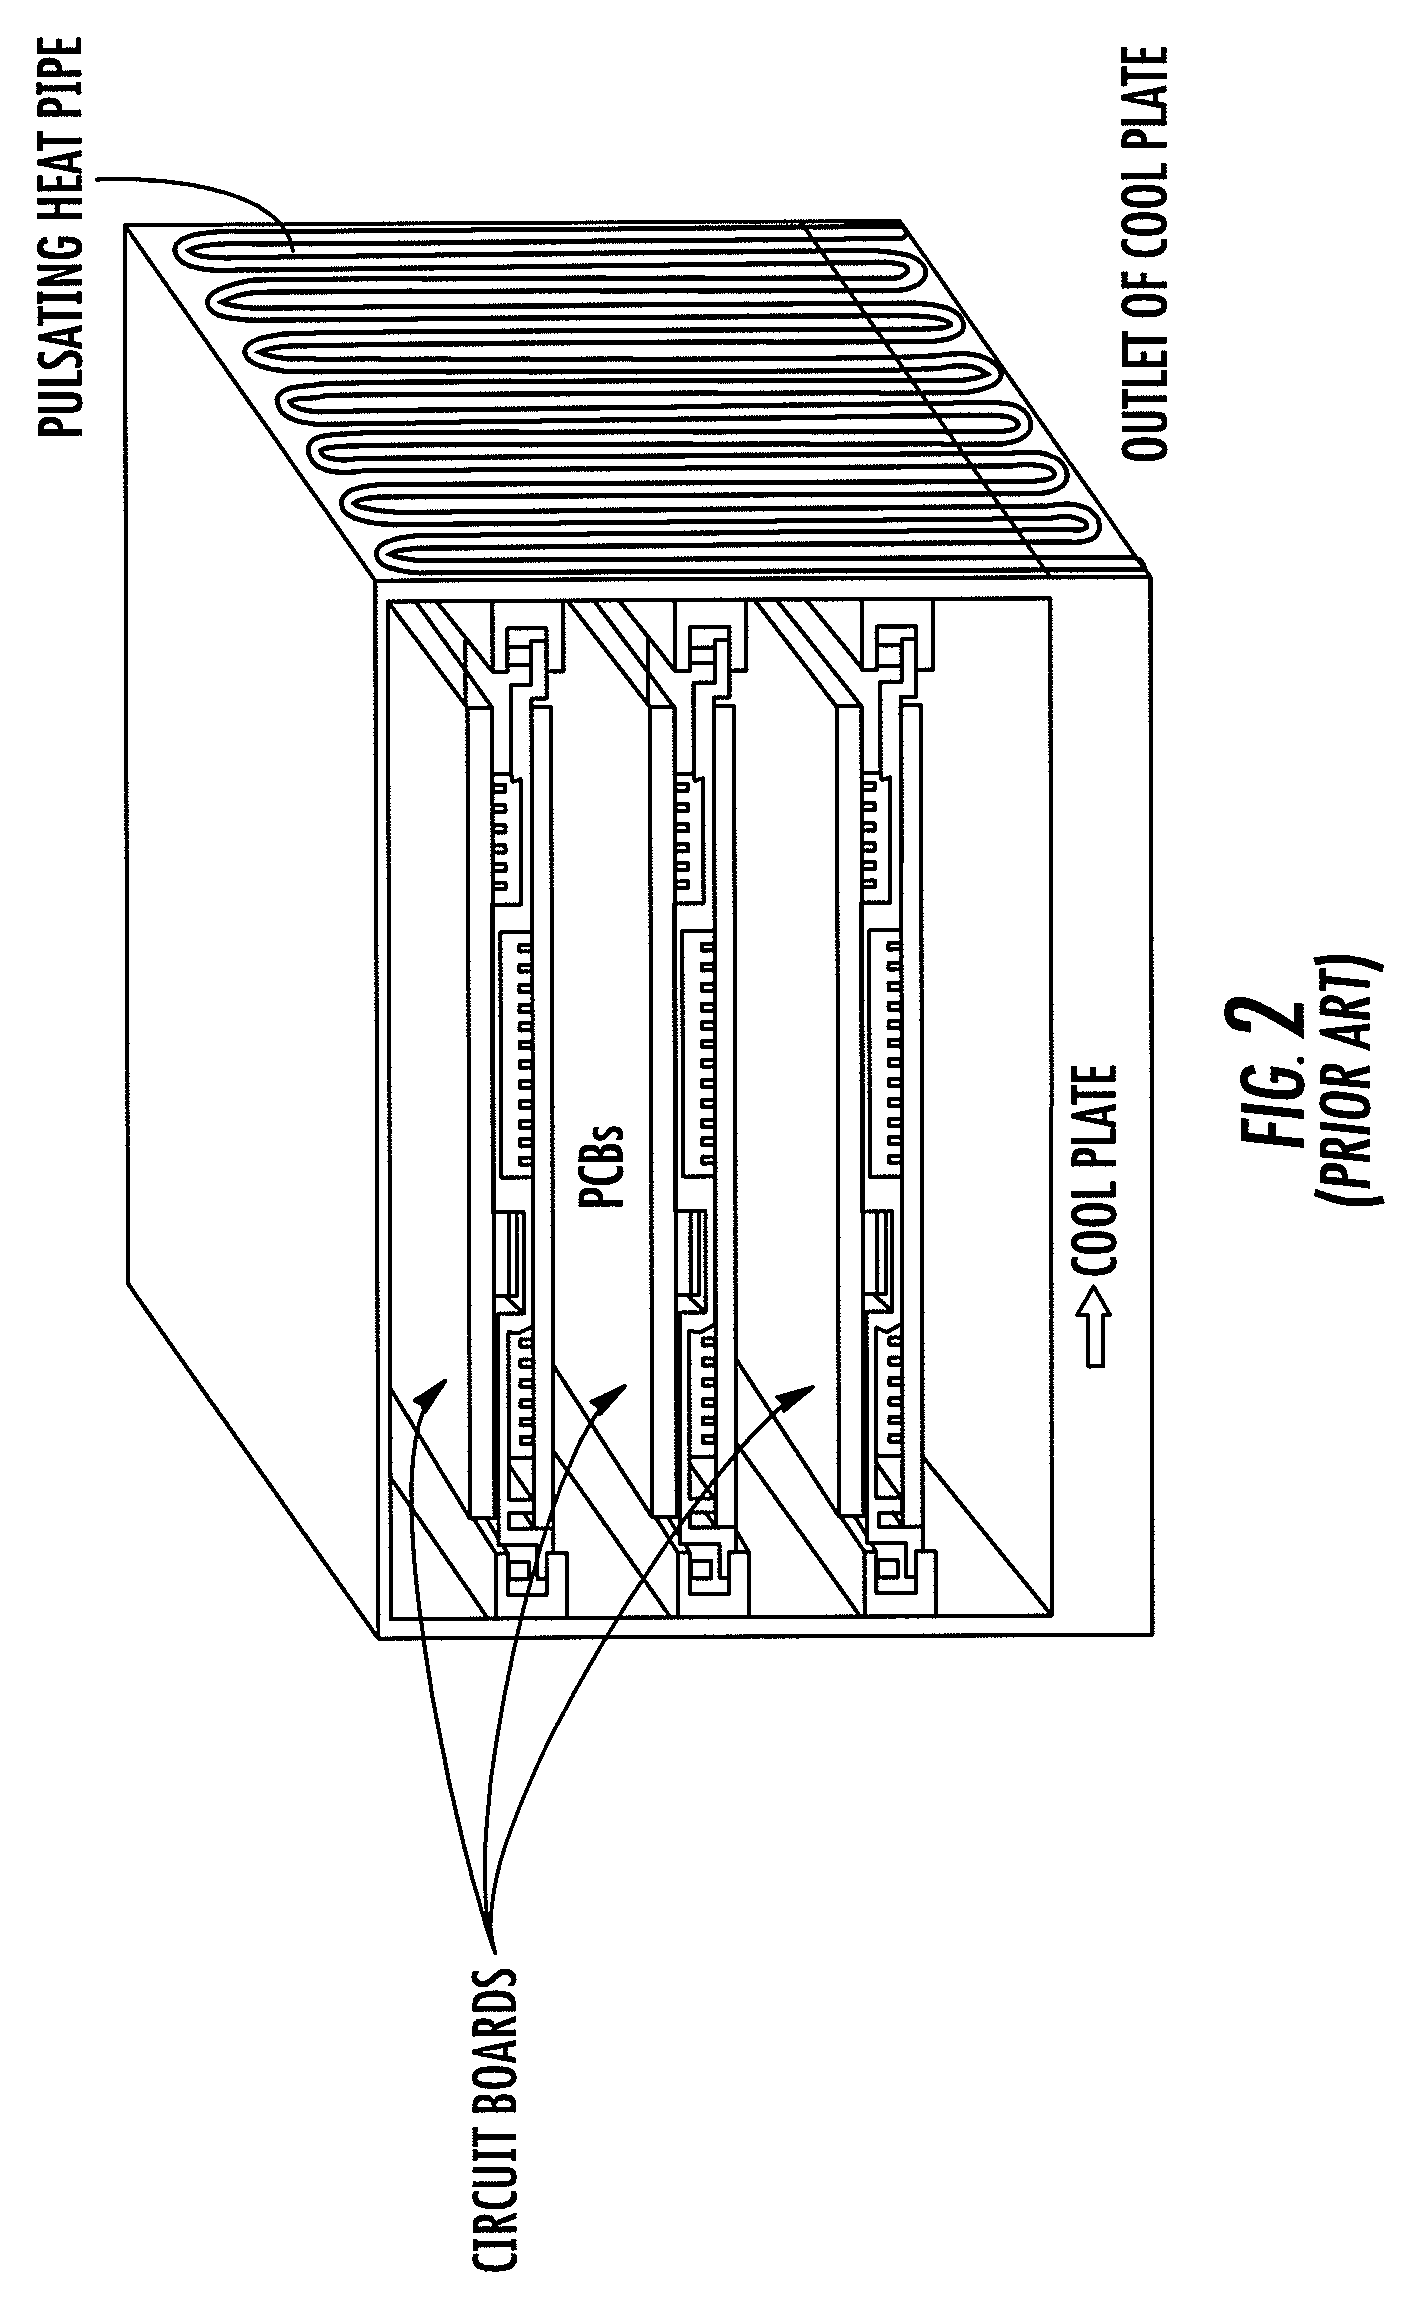 Cooling apparatus, system, and associated method